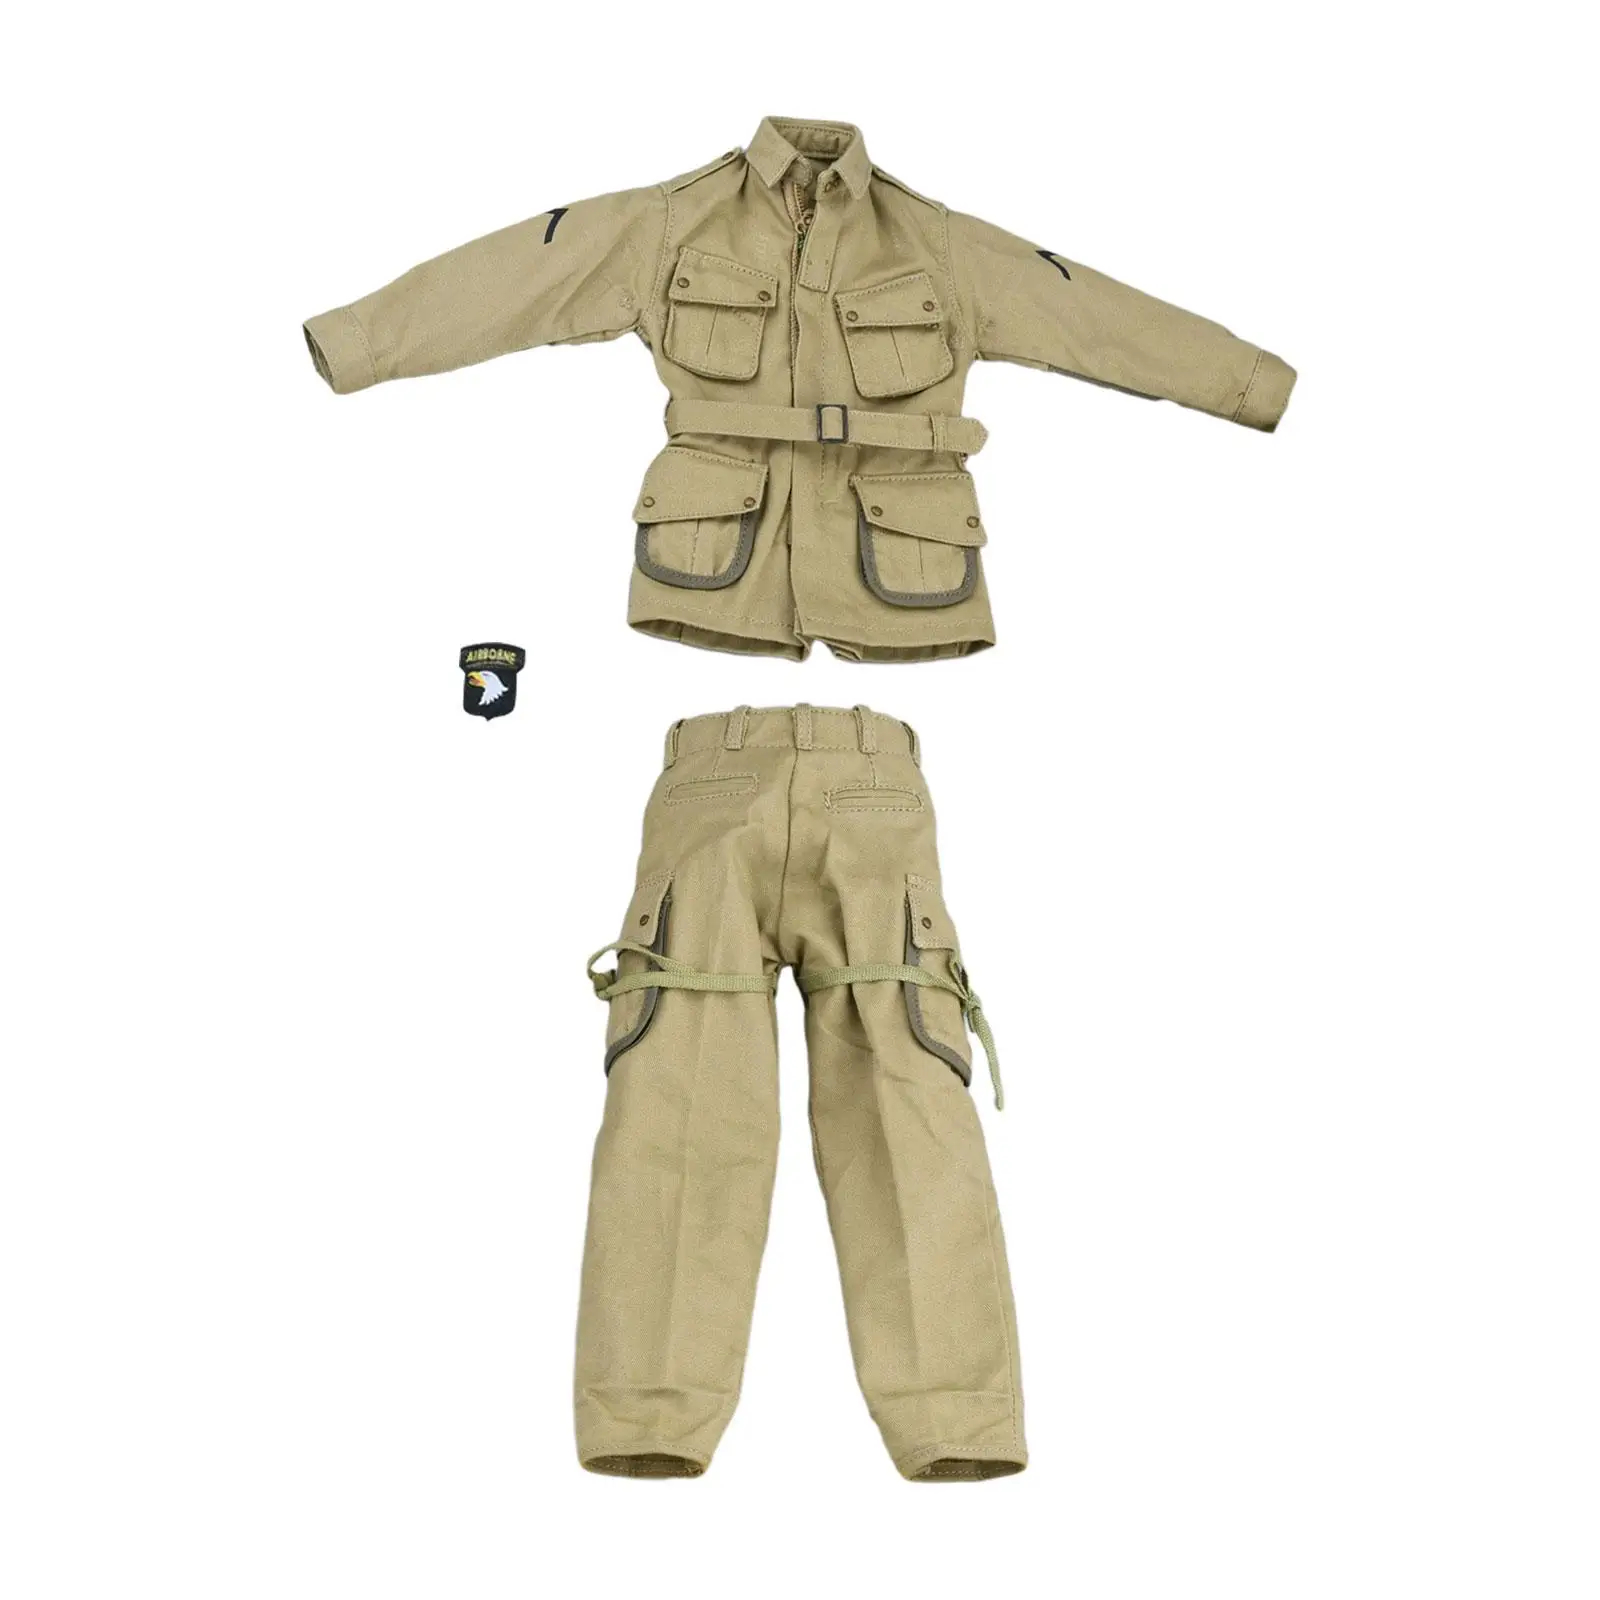 1/6 Scale Clothes Miniature Soldier Costume for 12`` Action Figures Costume